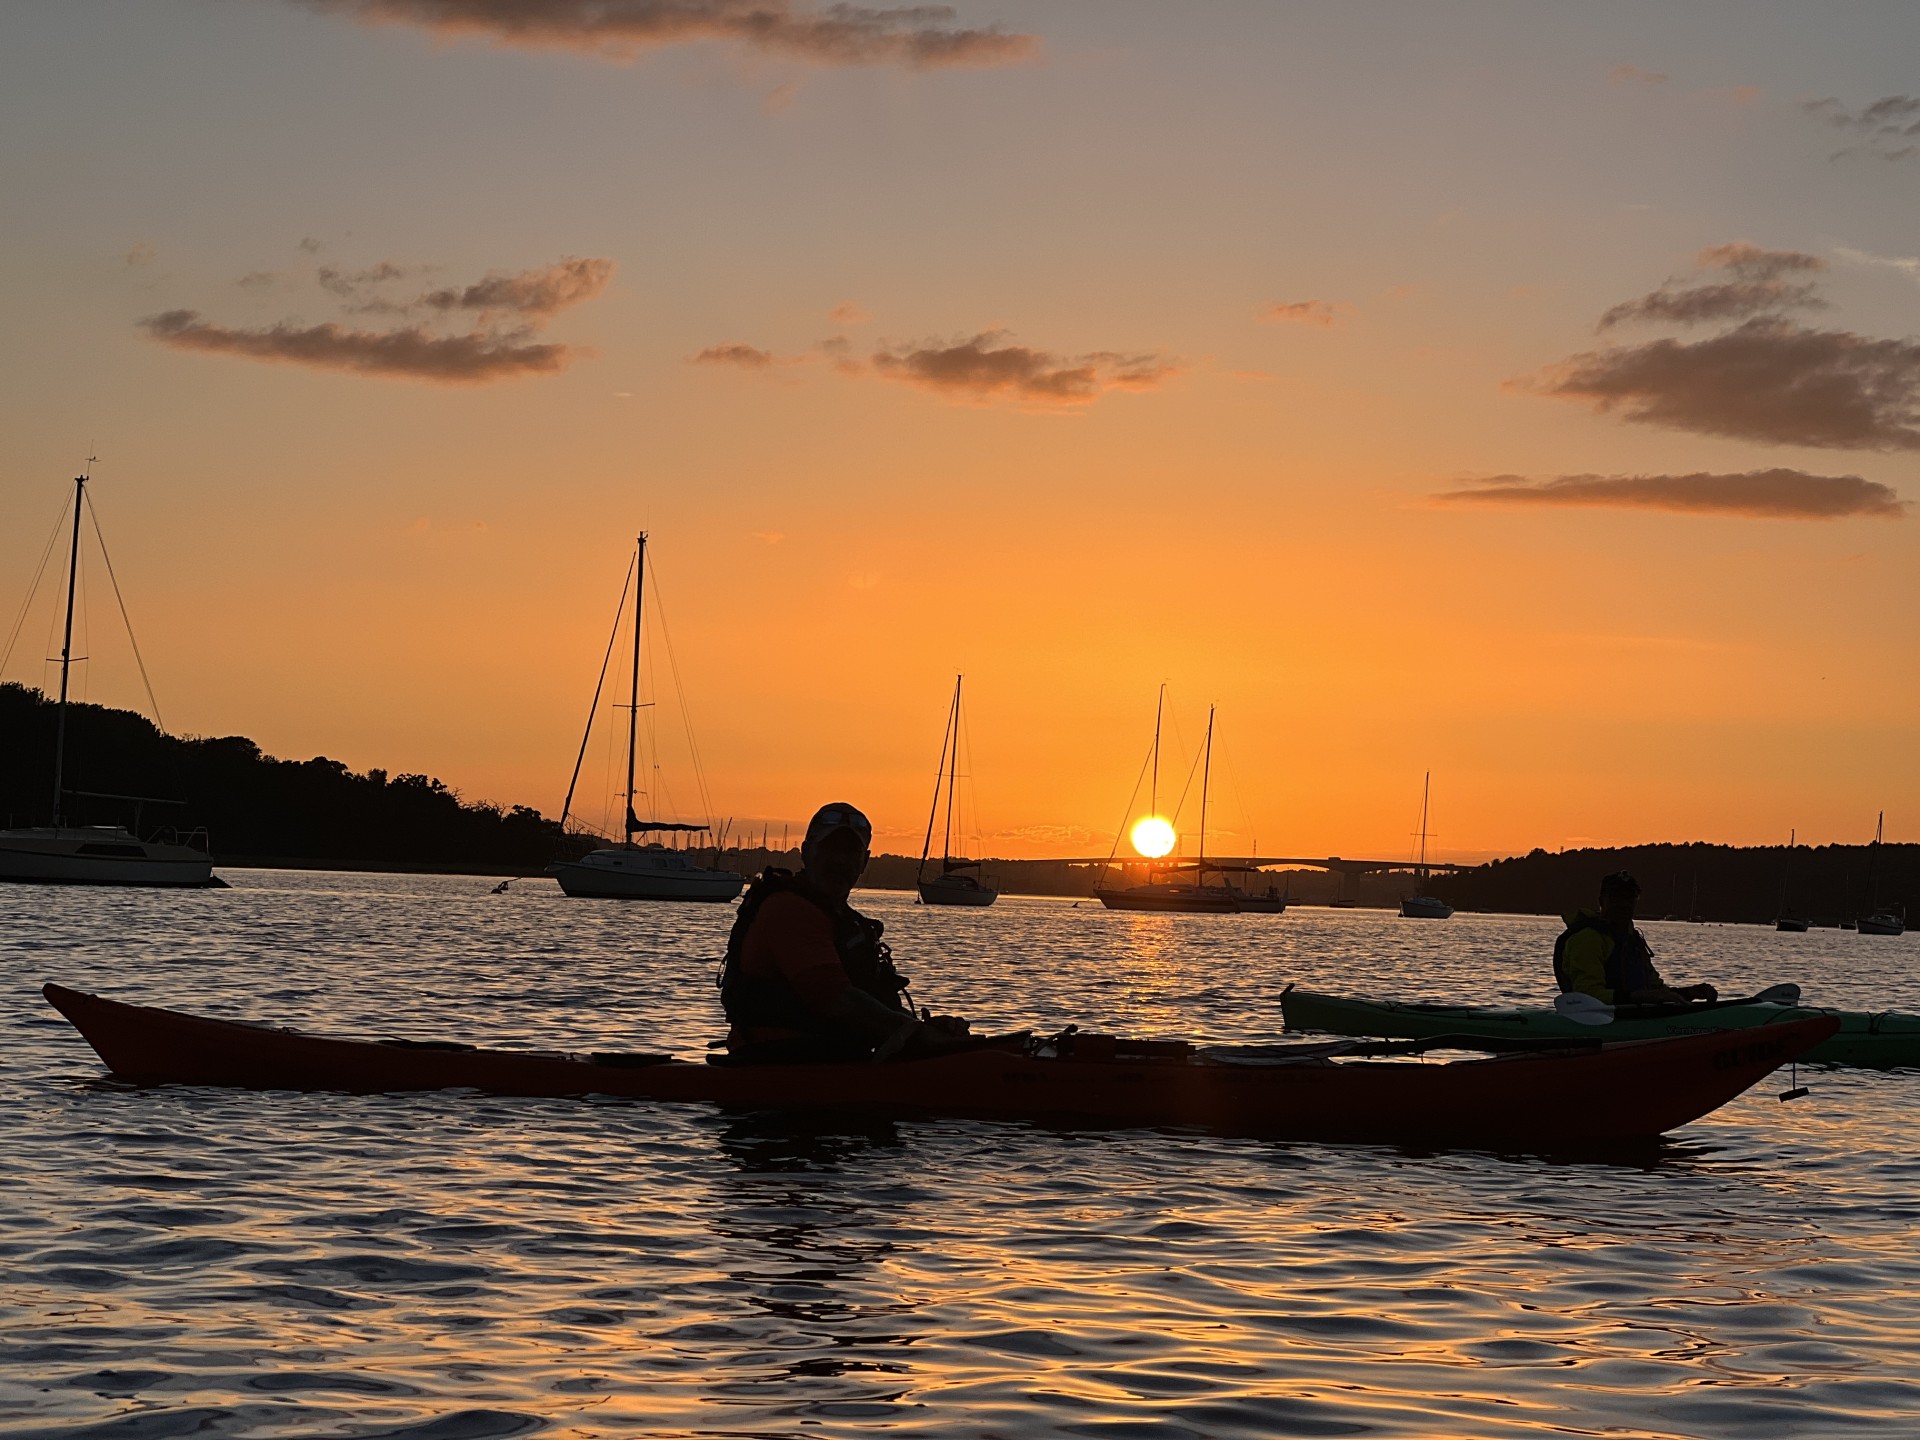 Sea kayakers at sunset on the Orwell estuary with NOMAD Sea Kayaking.